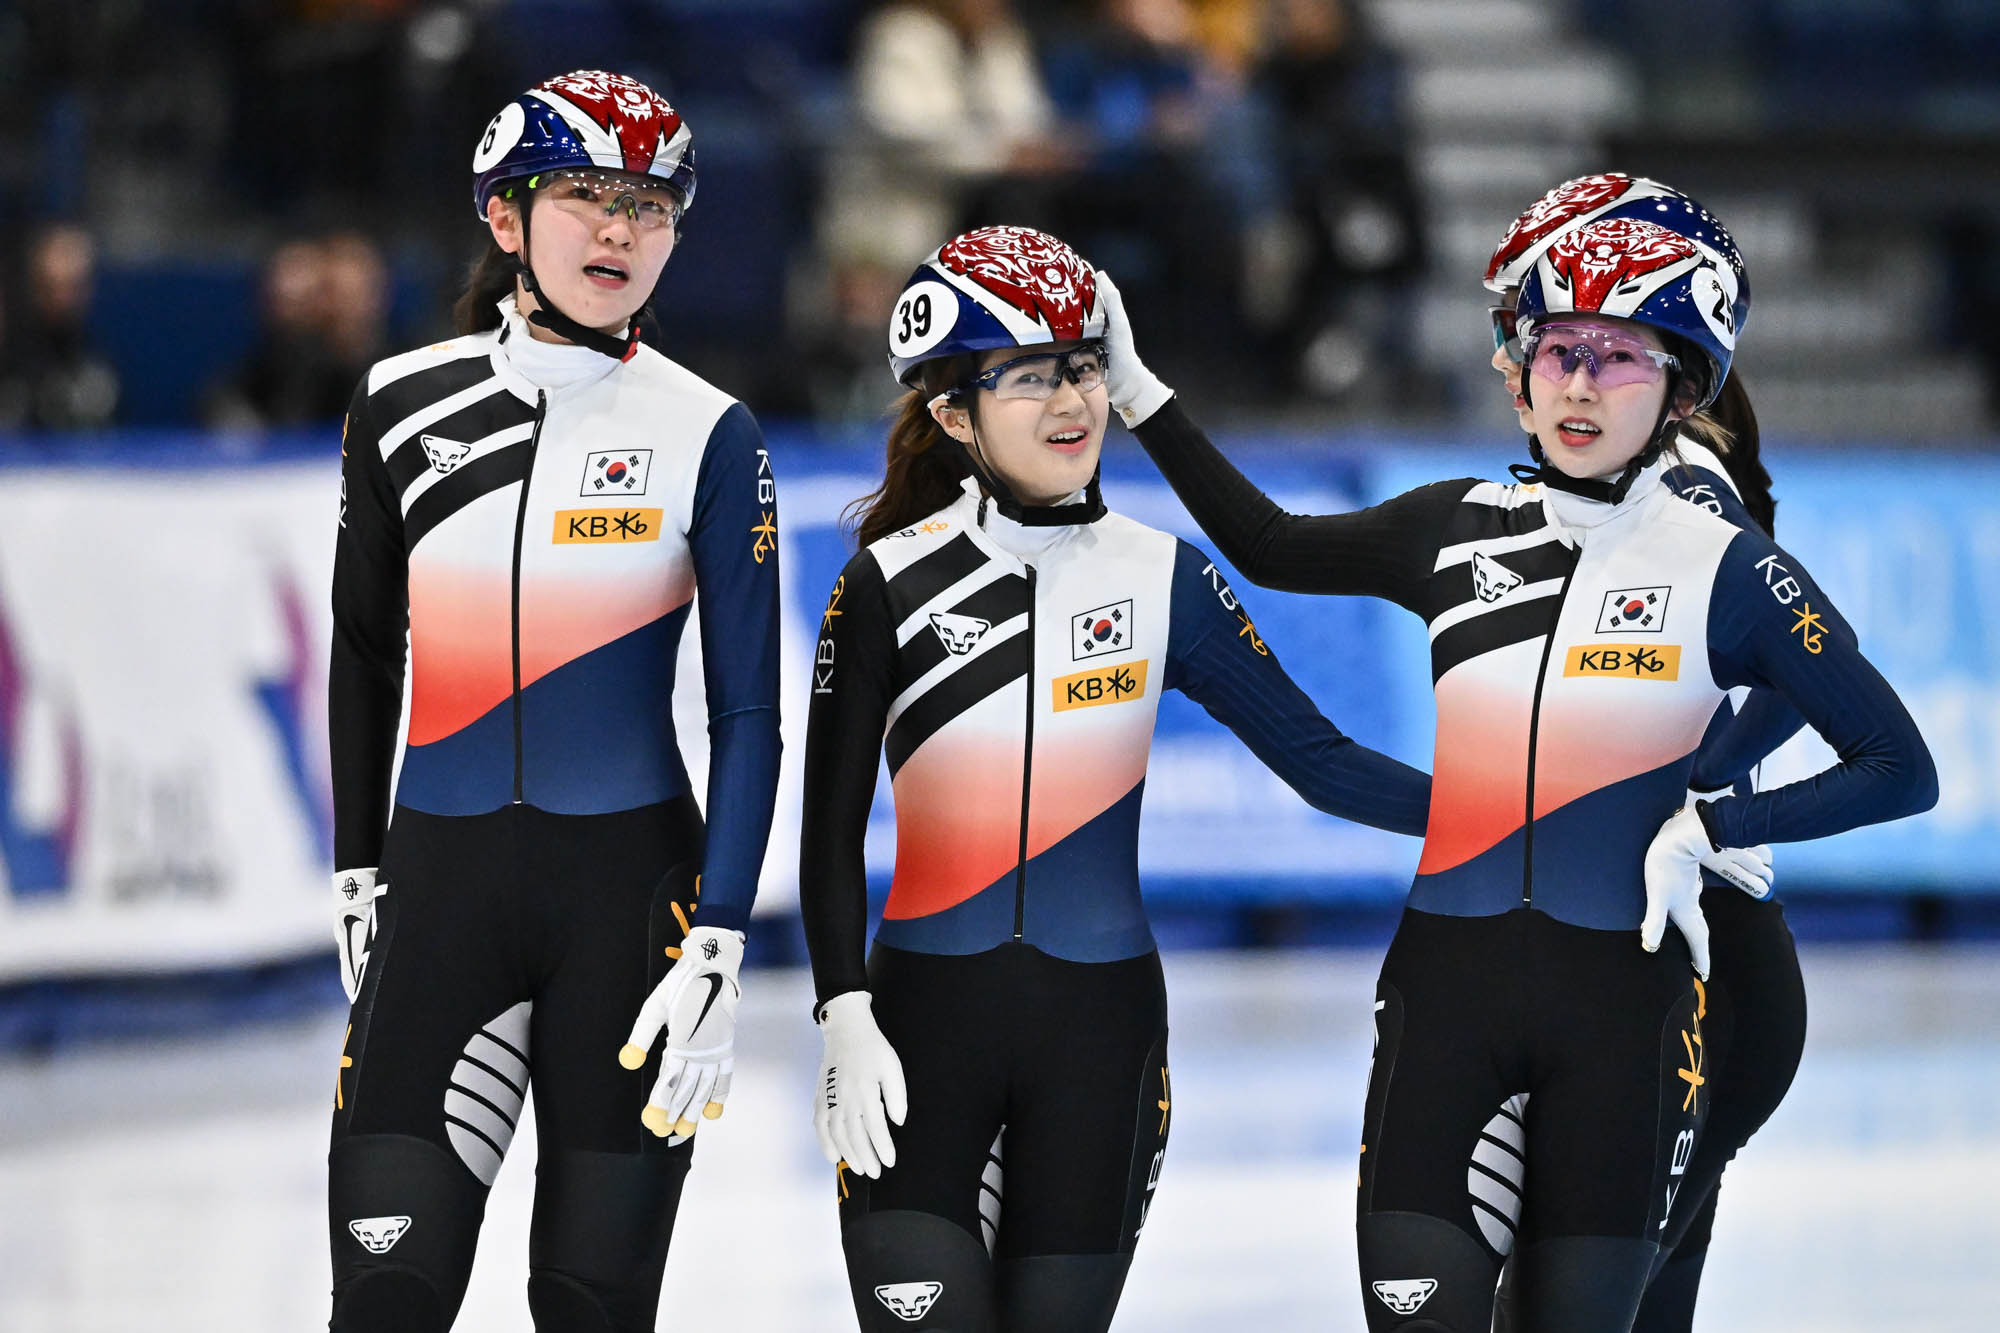 LAVAL, CANADA - NOVEMBER 05:  Shim Suk Hee, Park Jiyun  and Lee Soyoun of the Republic of Korea celebrate after competing in the women’s 3000 m relay final during the ISU Four Continents Short Track Speed Skating Championships at Place Bell on November 5, 2023 in Laval, Quebec, Canada.  (Photo by Minas Panagiotakis - International Skating Union/International Skating Union via Getty Images)